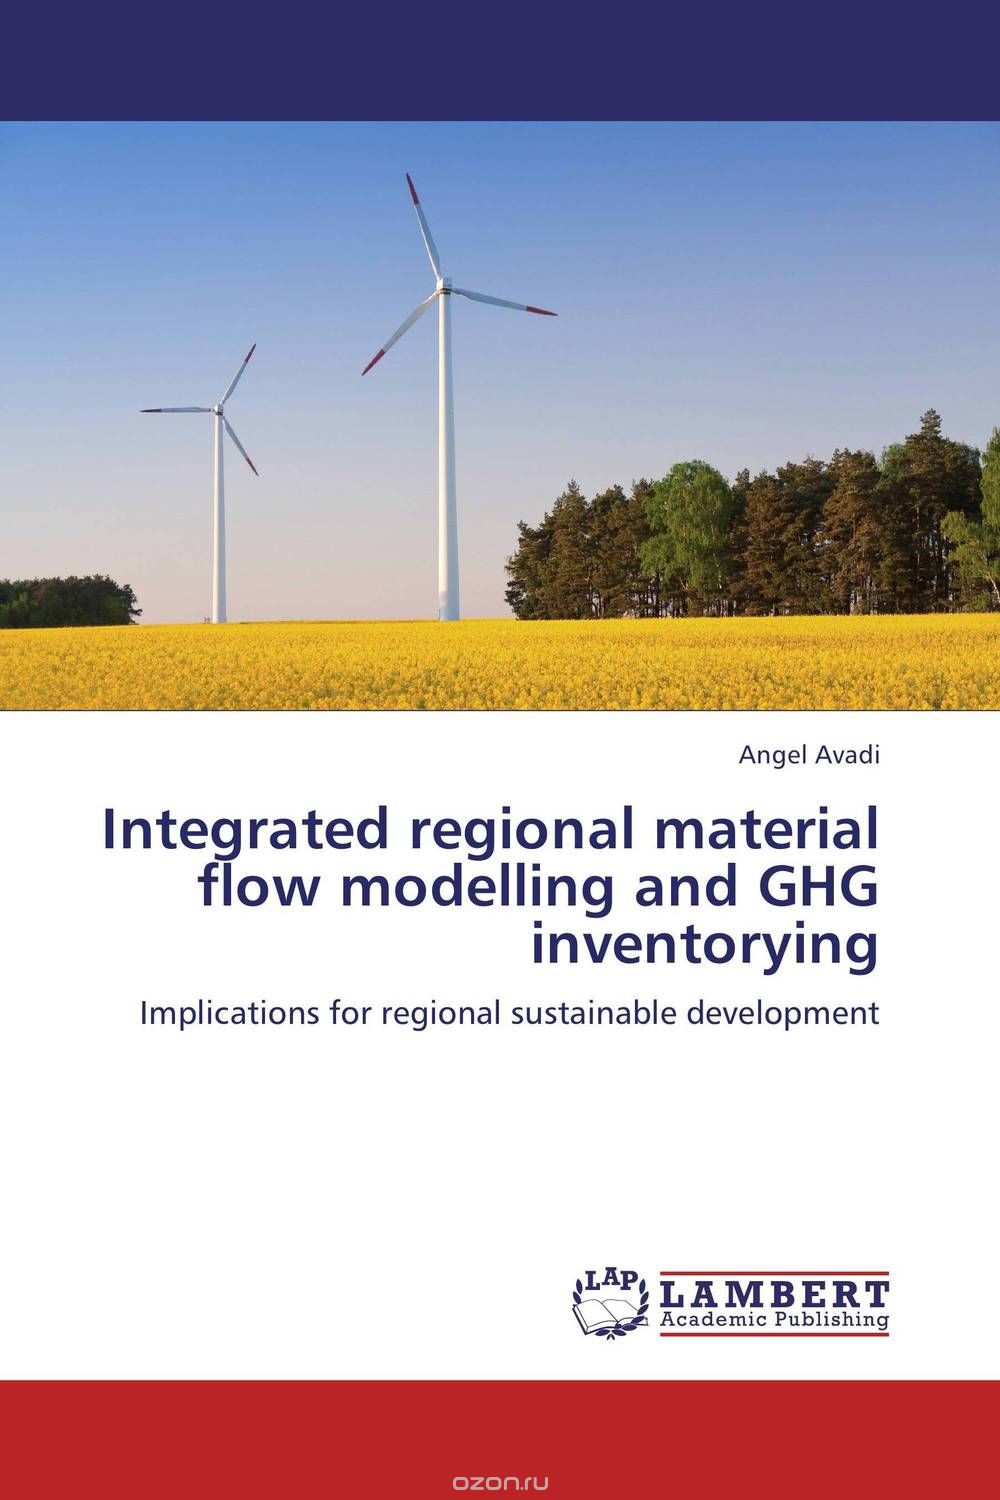 Integrated regional material flow modelling and GHG inventorying